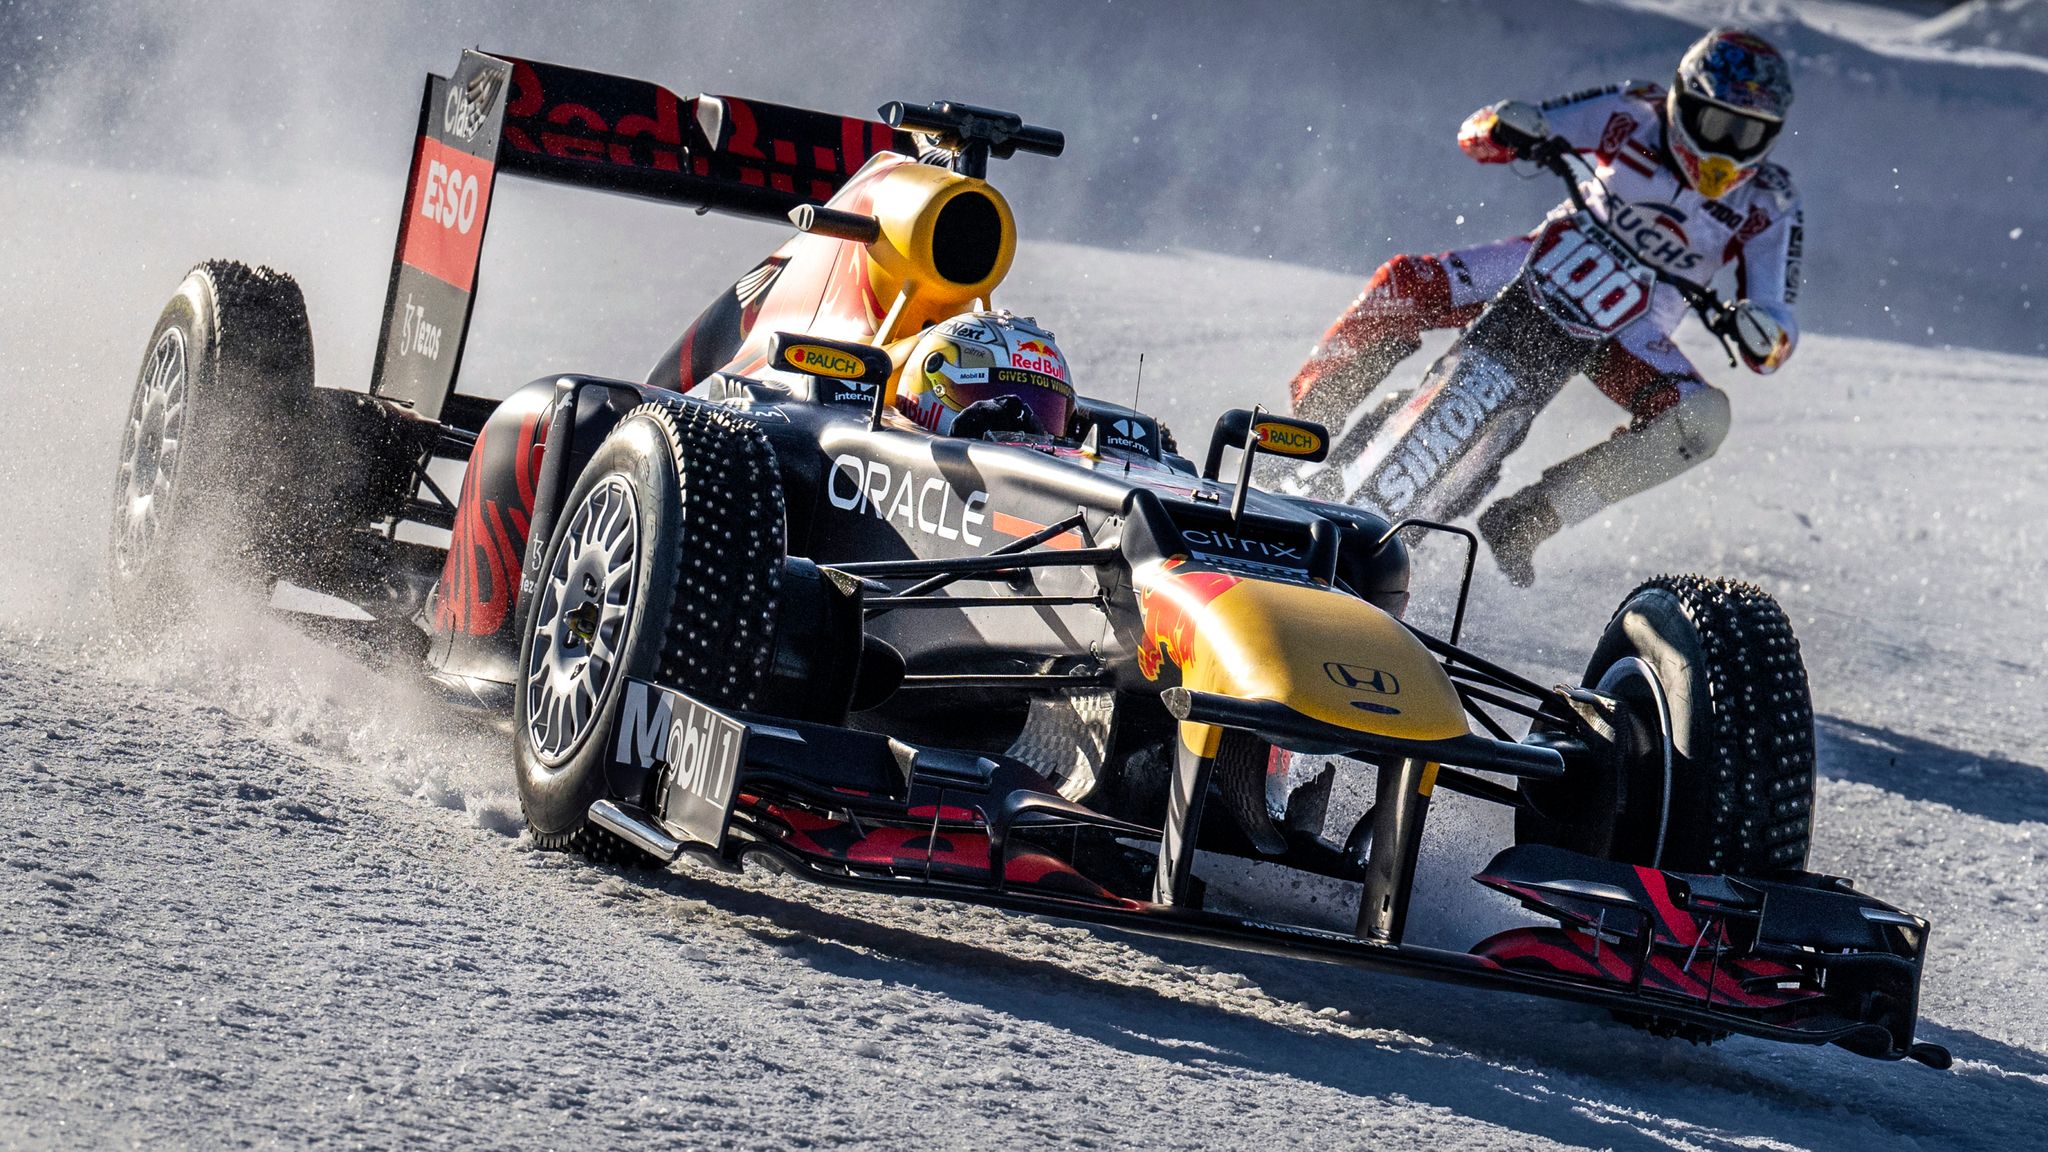 Max Verstappen completes epic F1 drive on ice as Red Bull driver sets sights on retaining title in 2022